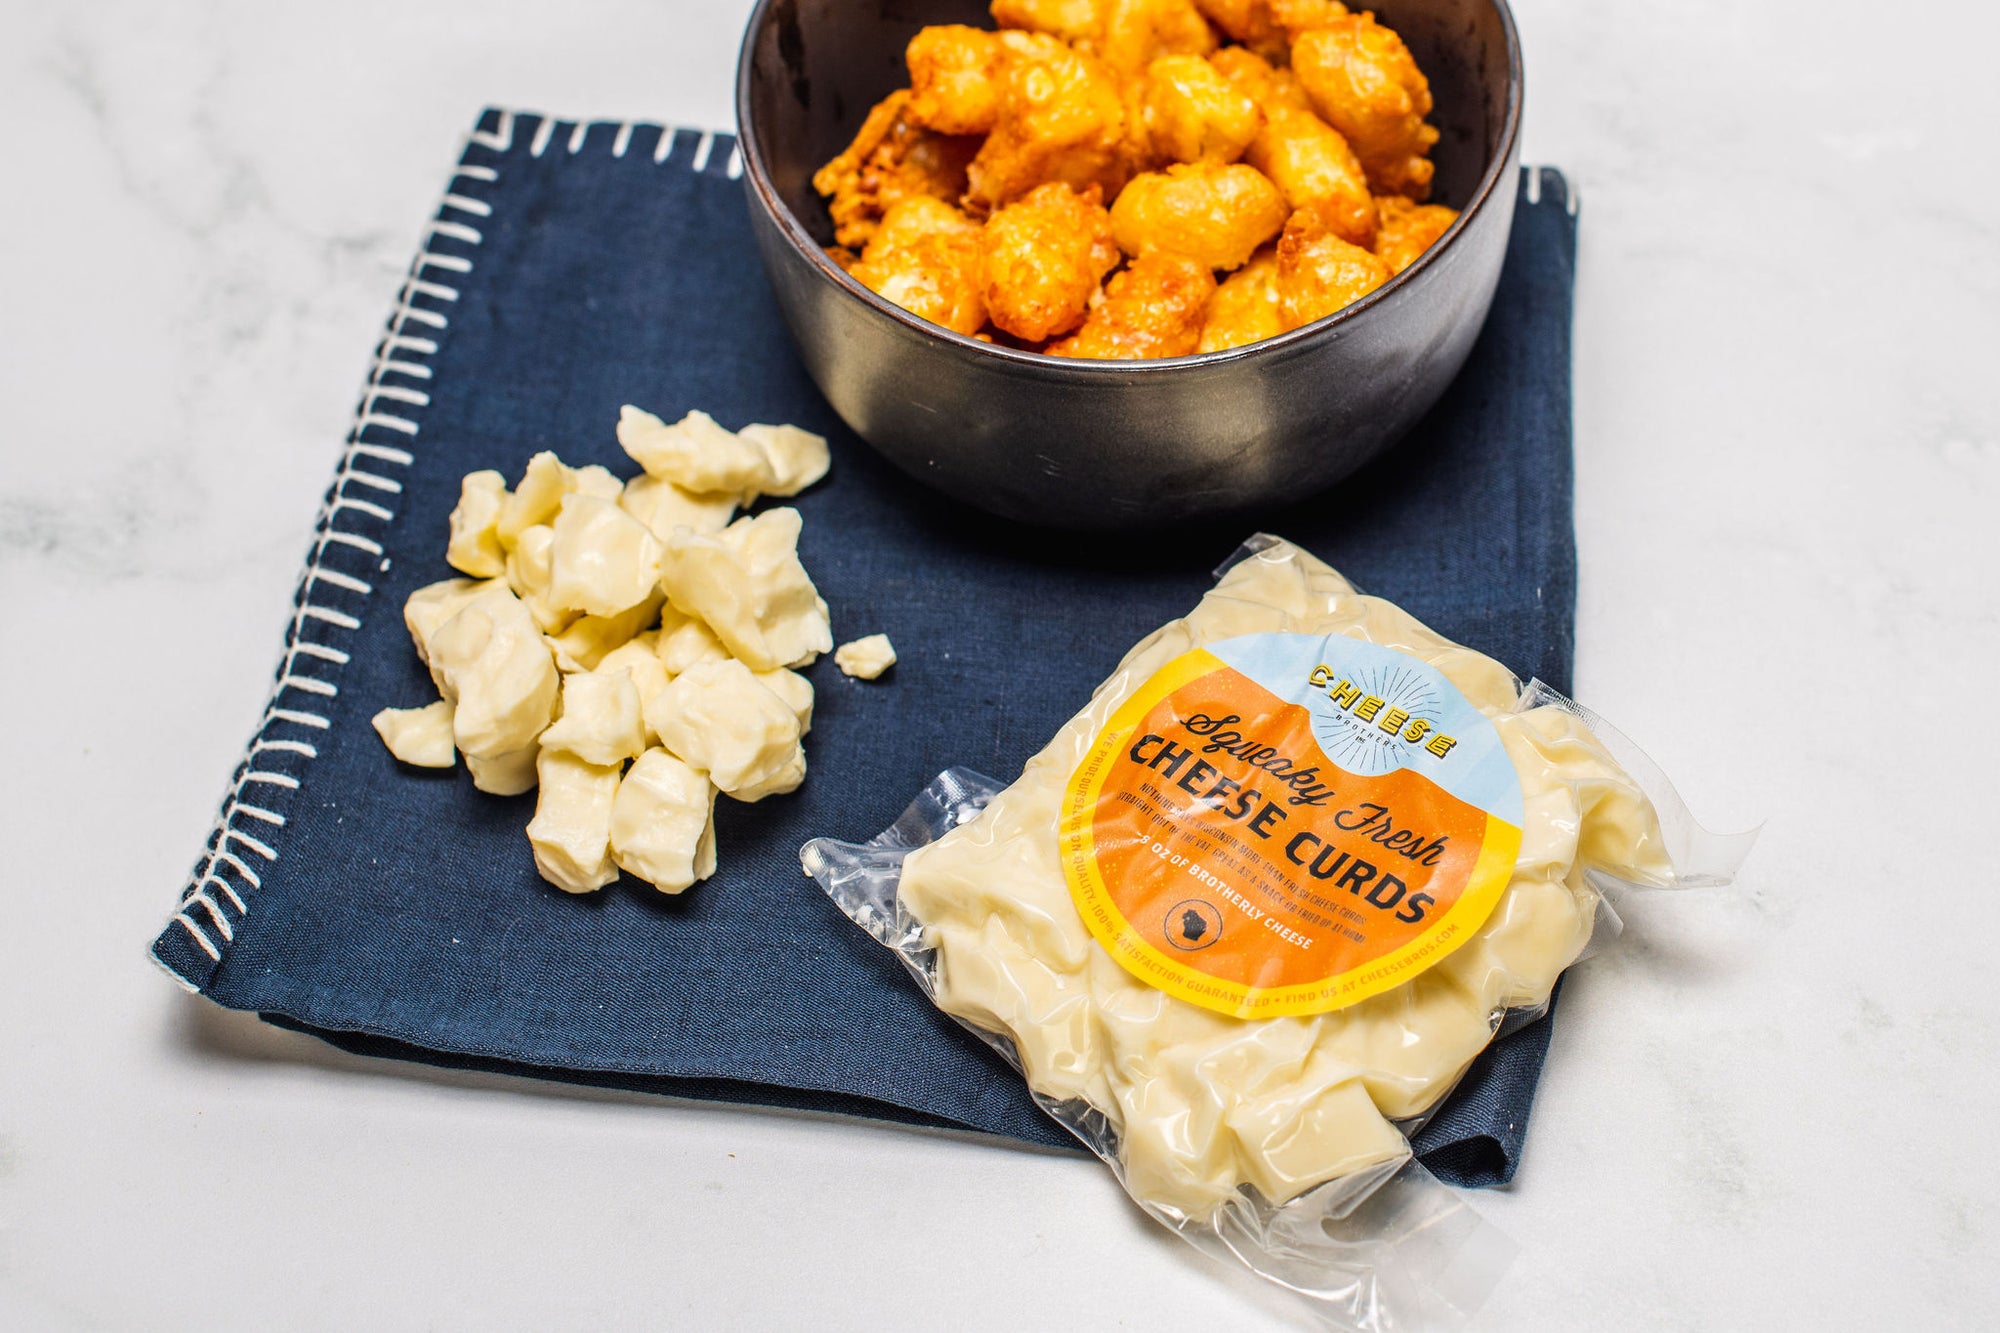 Packages of Wisconsin cheese curds with a bag of batter mix. 